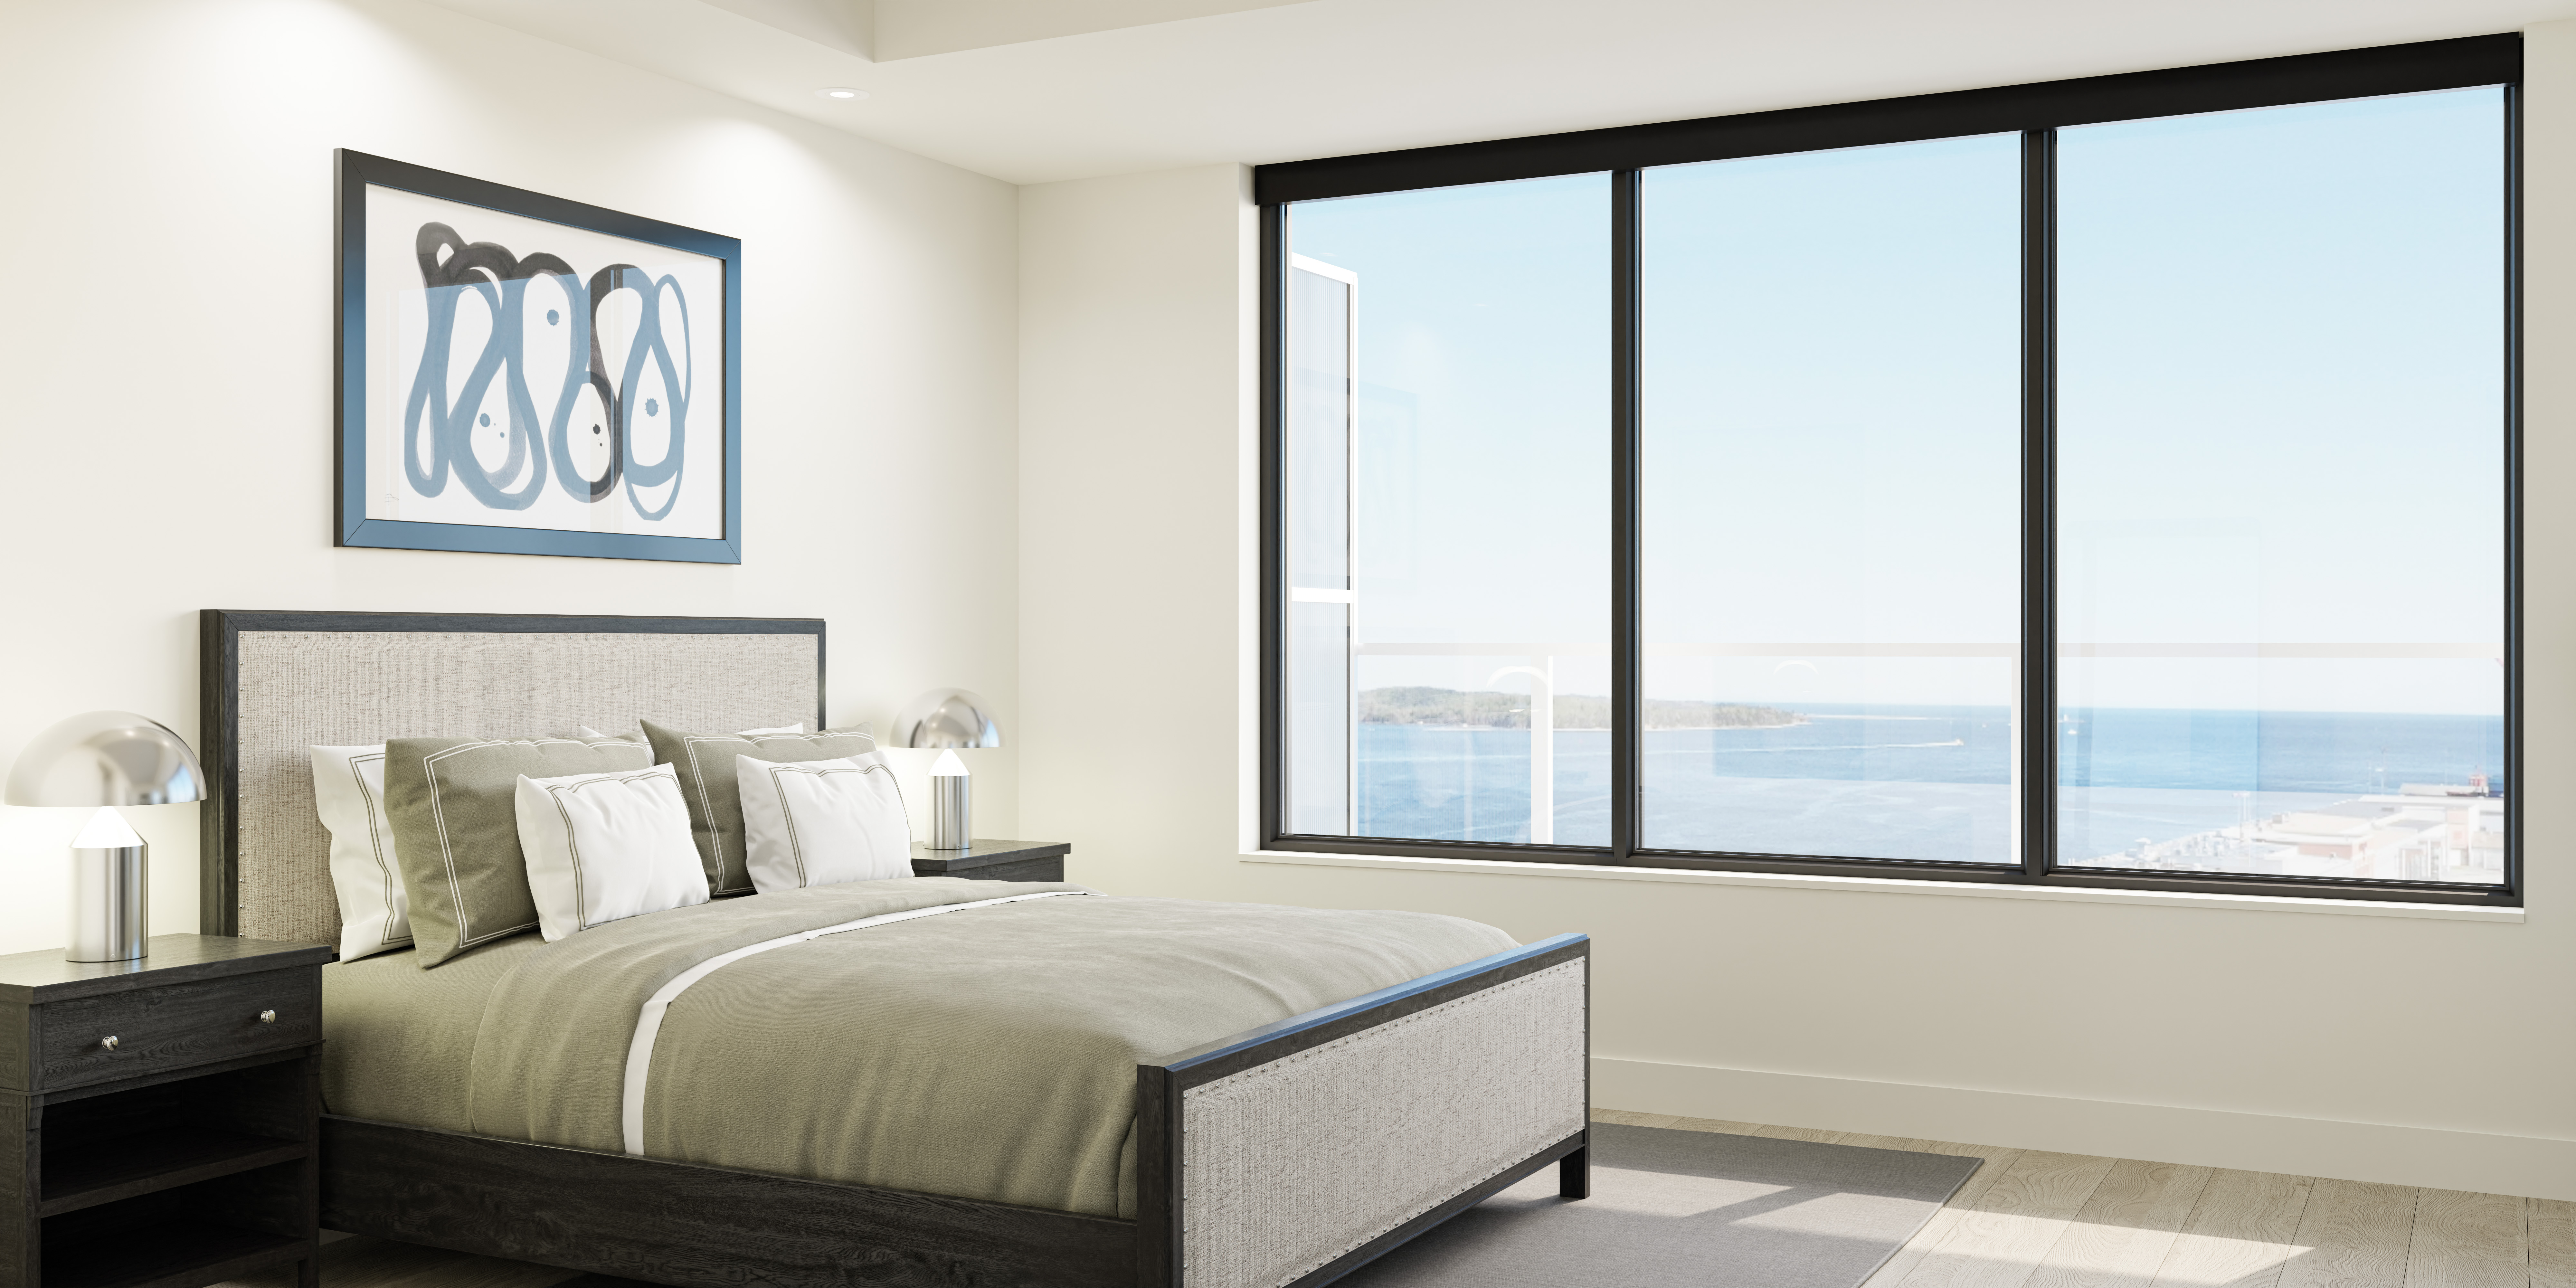 Cunard's bedroom suites with expansive windows